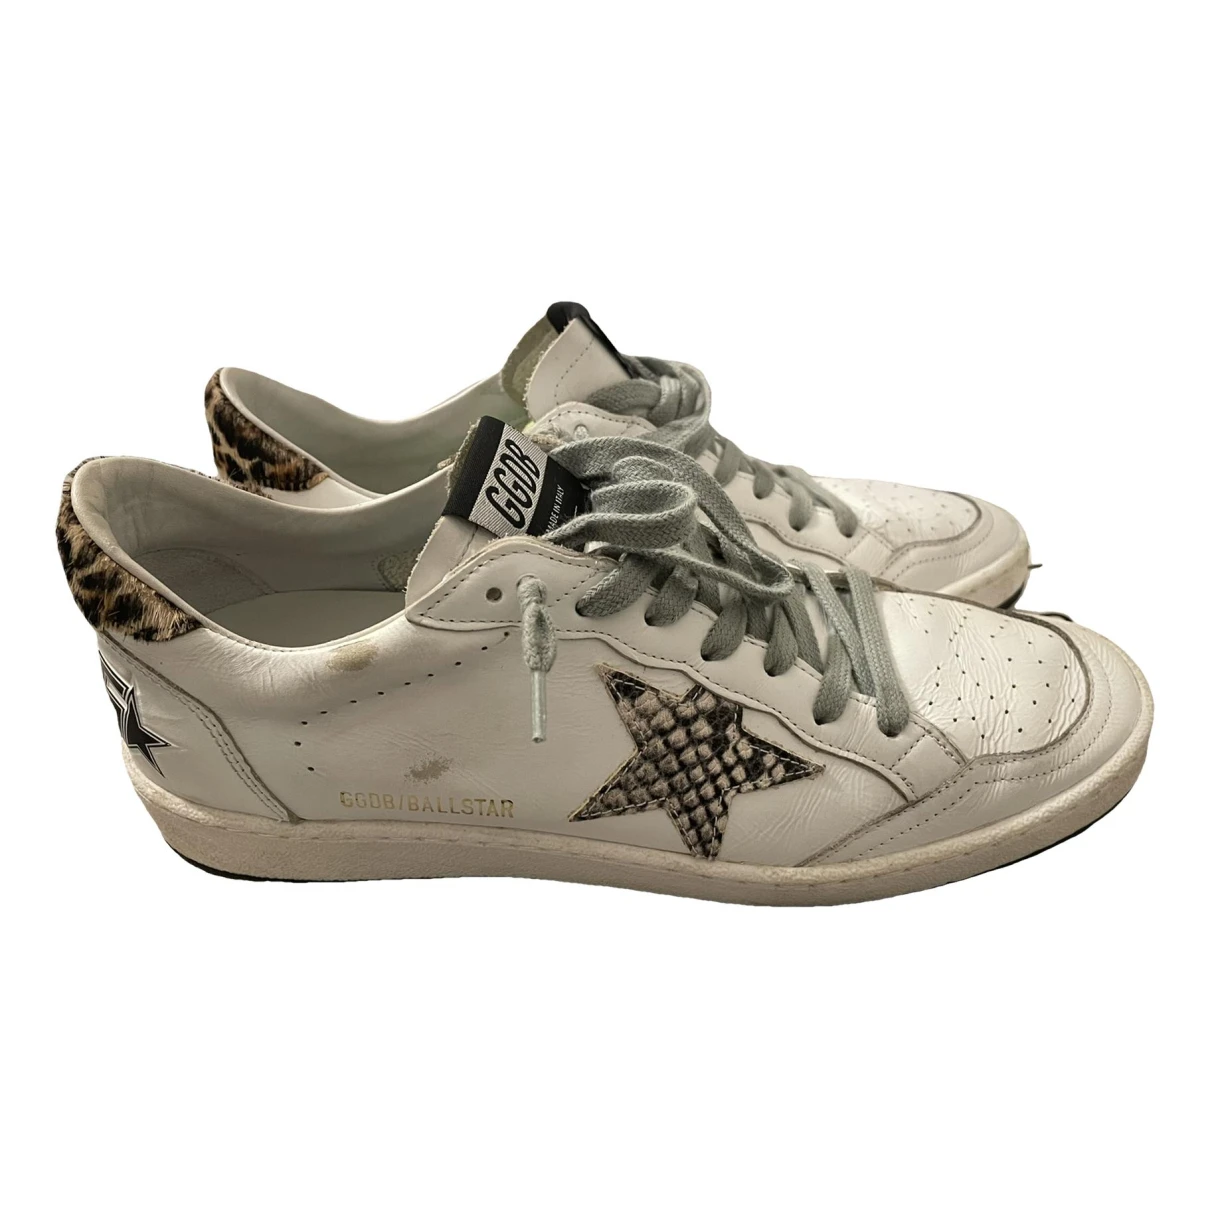 Pre-owned Golden Goose Ball Star Leather Trainers In White